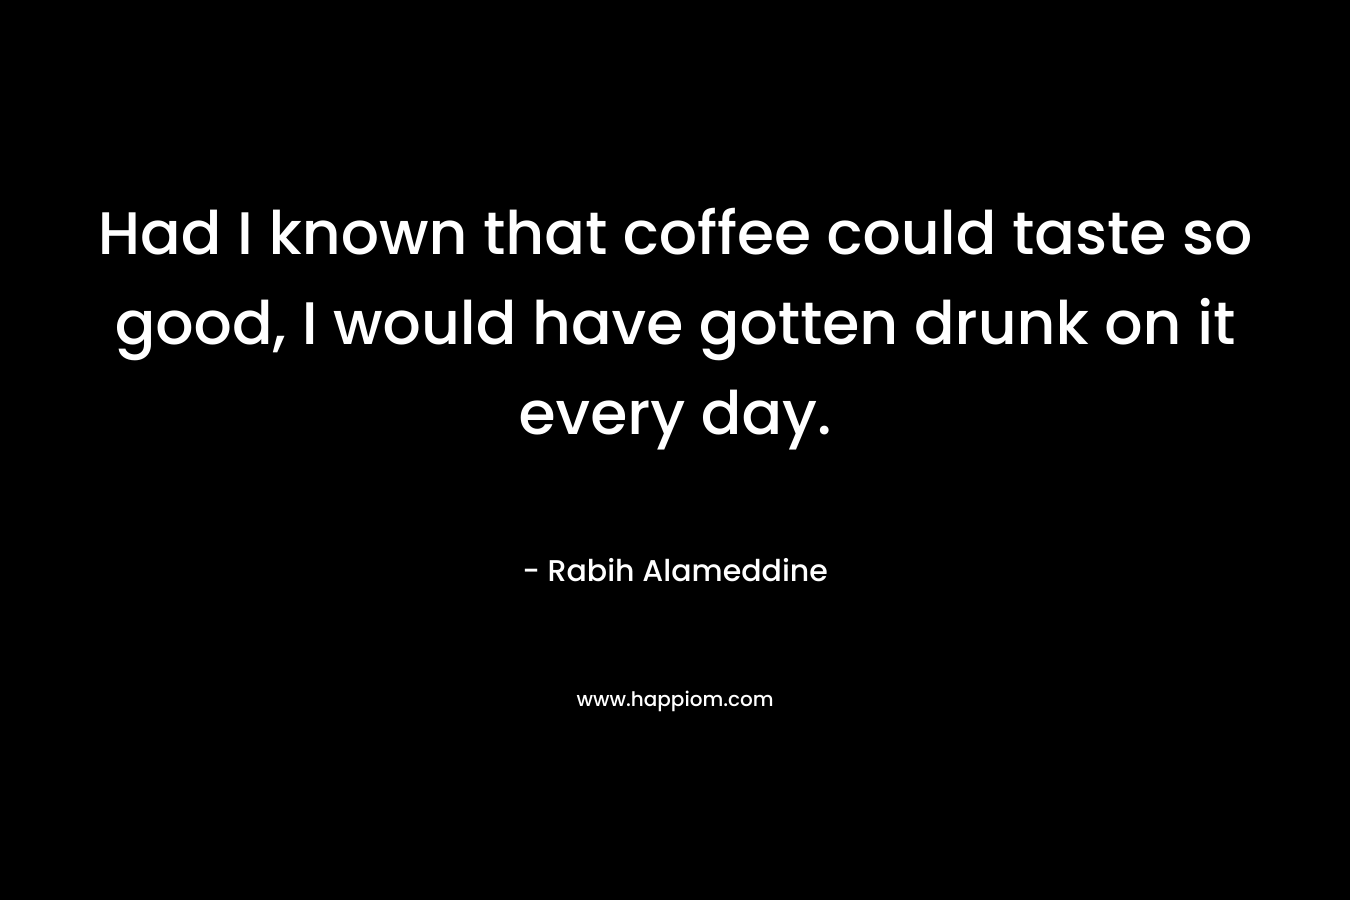 Had I known that coffee could taste so good, I would have gotten drunk on it every day. – Rabih Alameddine